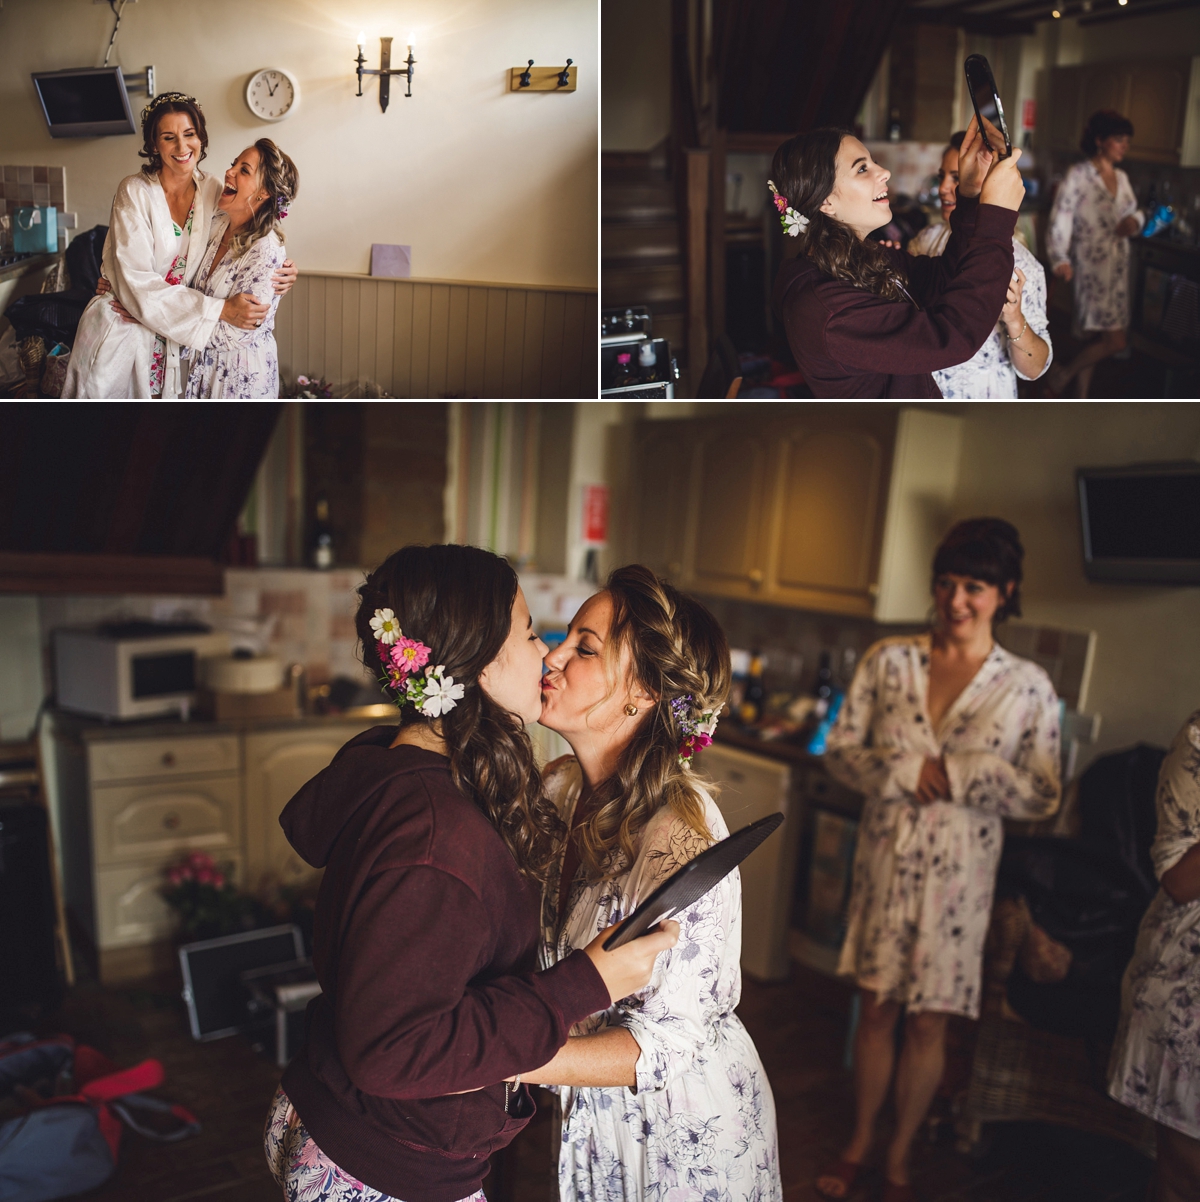 13 A 70s boho bride and her music inspired farm wedding